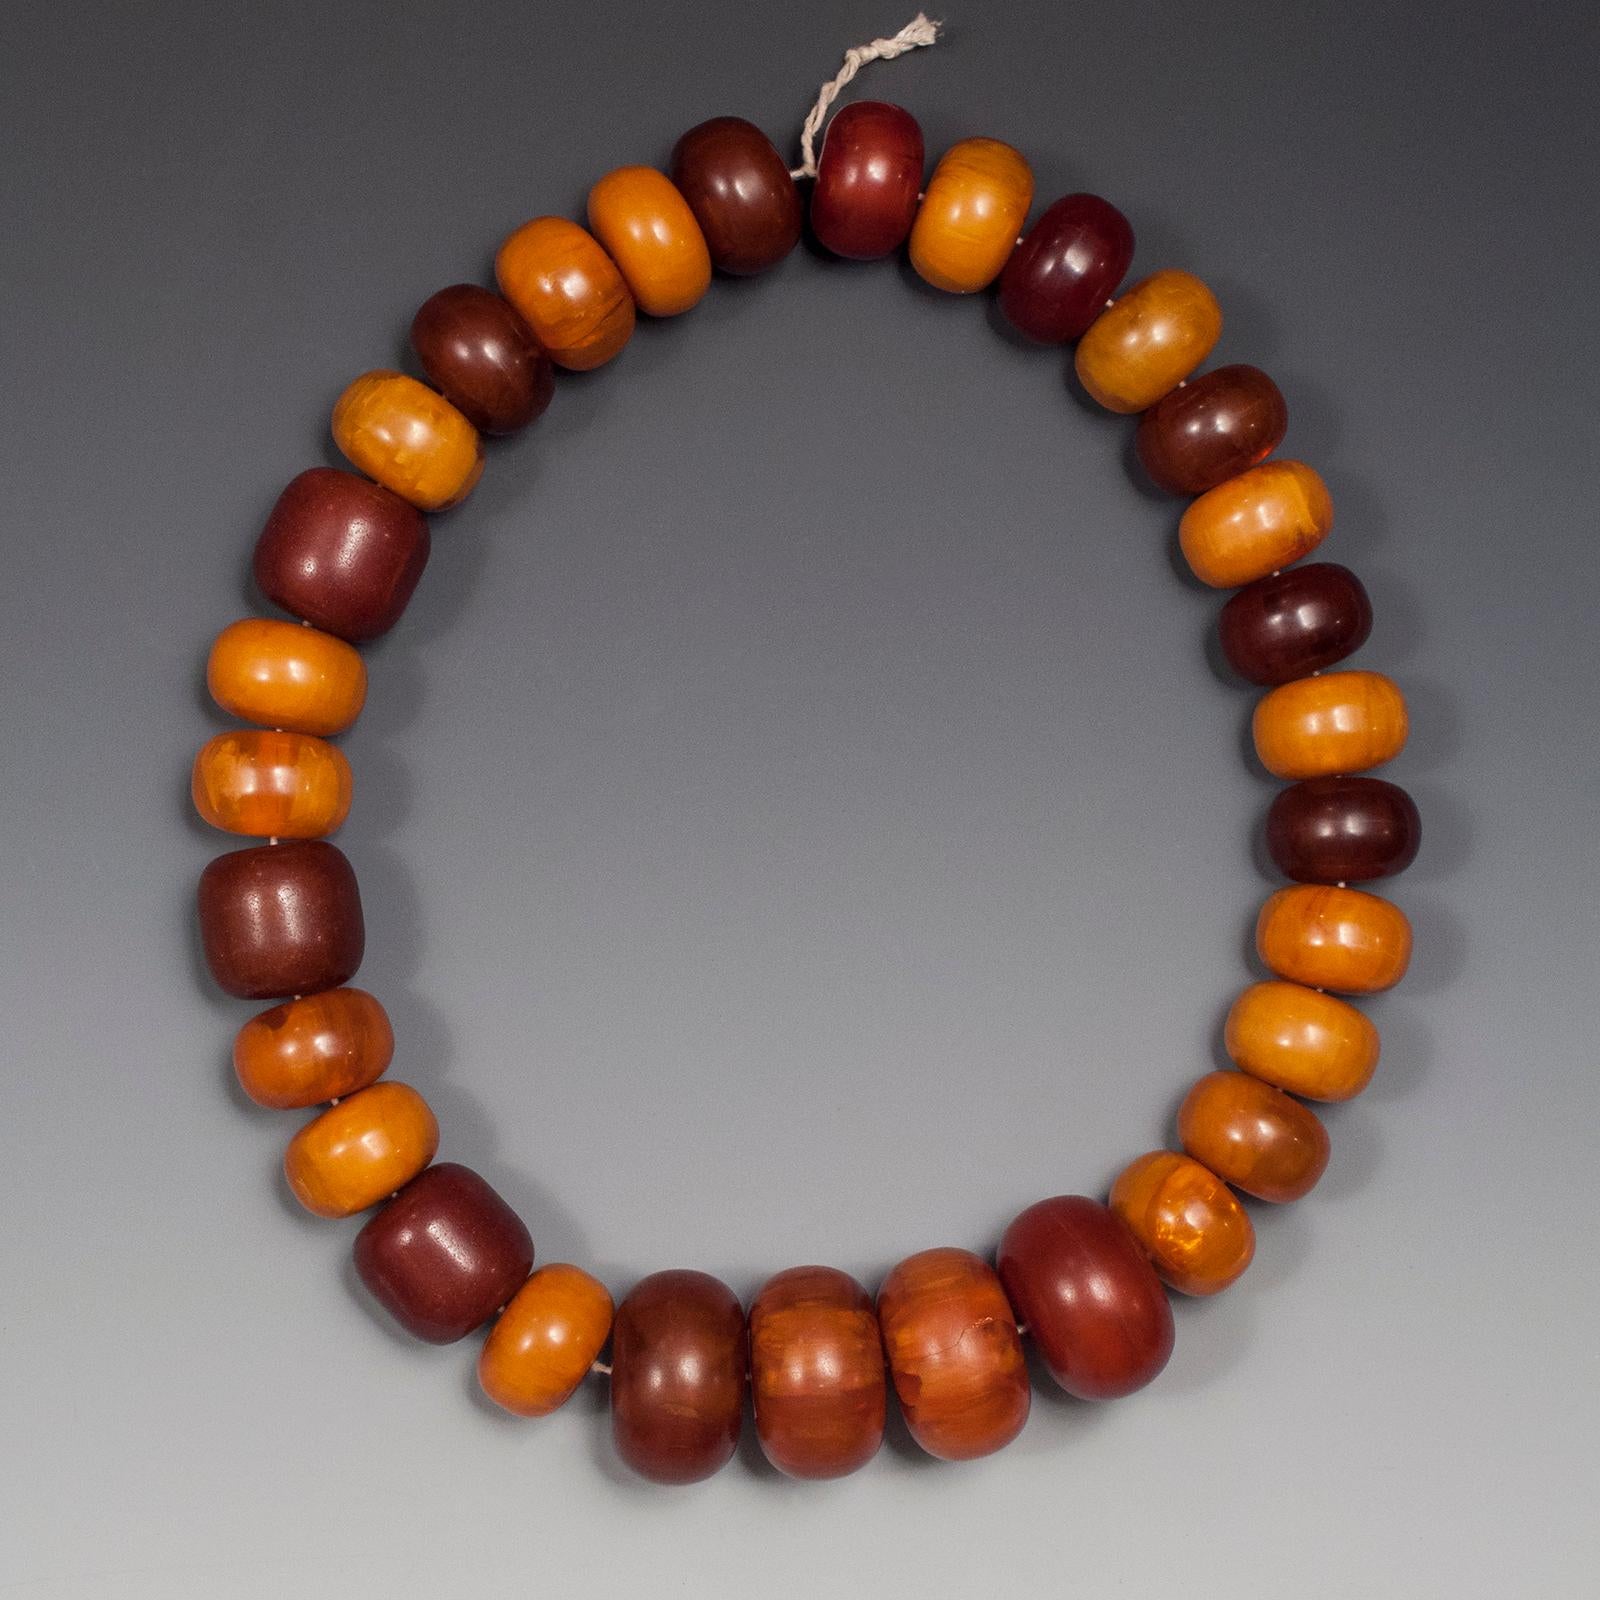 Early 20th century tribal Bakelite amber beads from Africa.

These beads are referred to as African amber and were made in Europe, likely Germany, of phenolic resin or Bakelite. This is a nice strand of 30 beads from a private Nevada collection